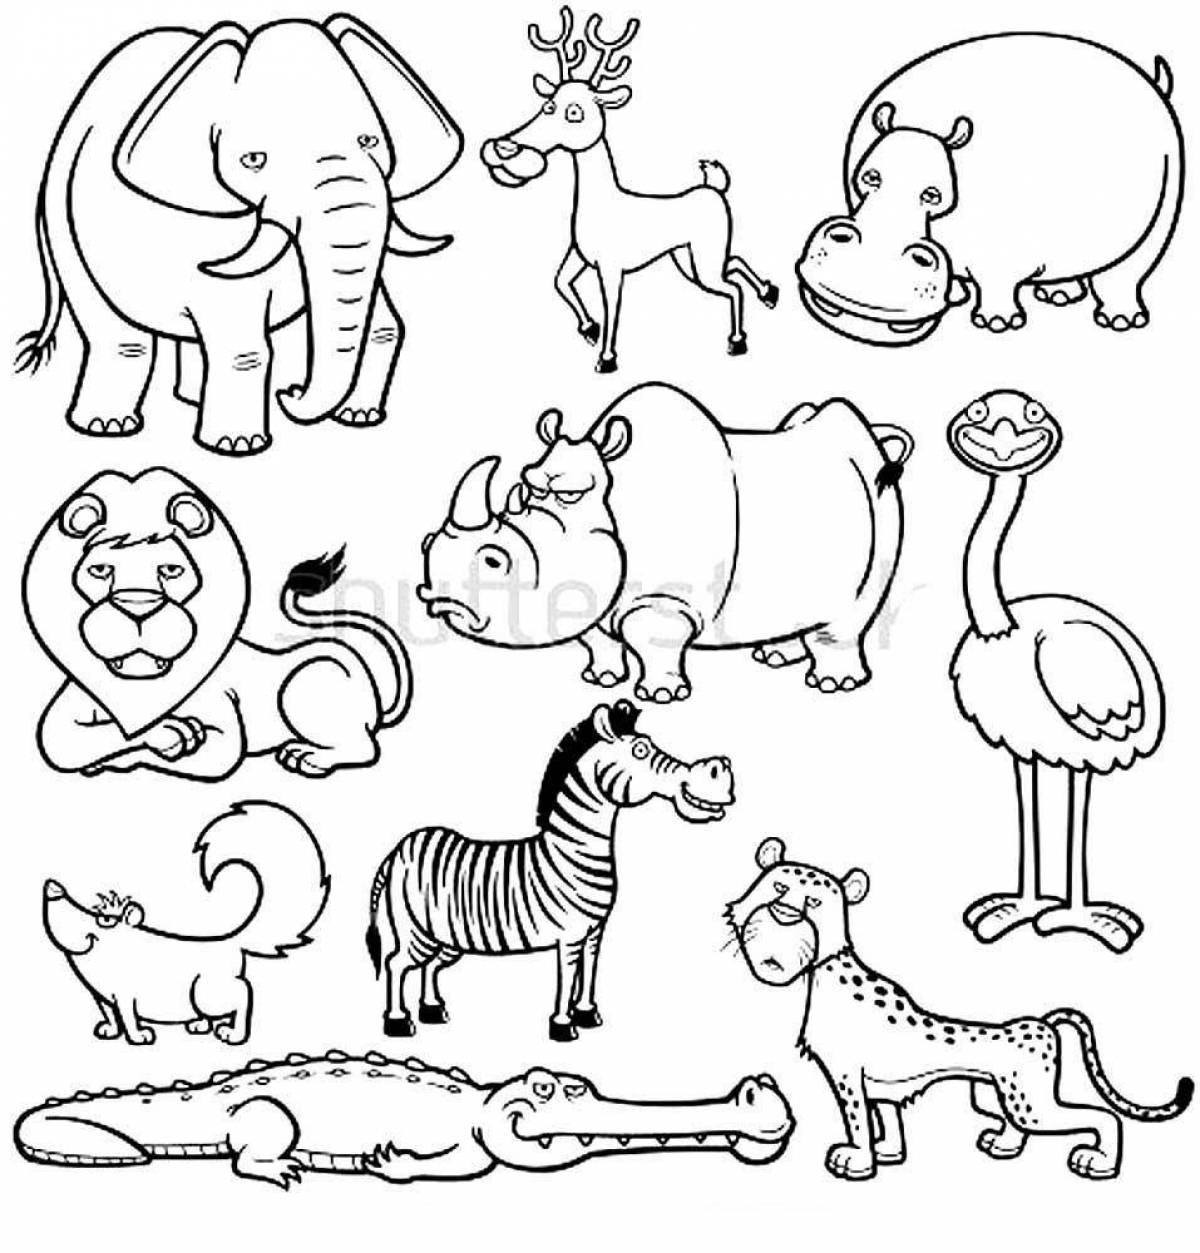 Innovative African Animal Coloring Page for Kids